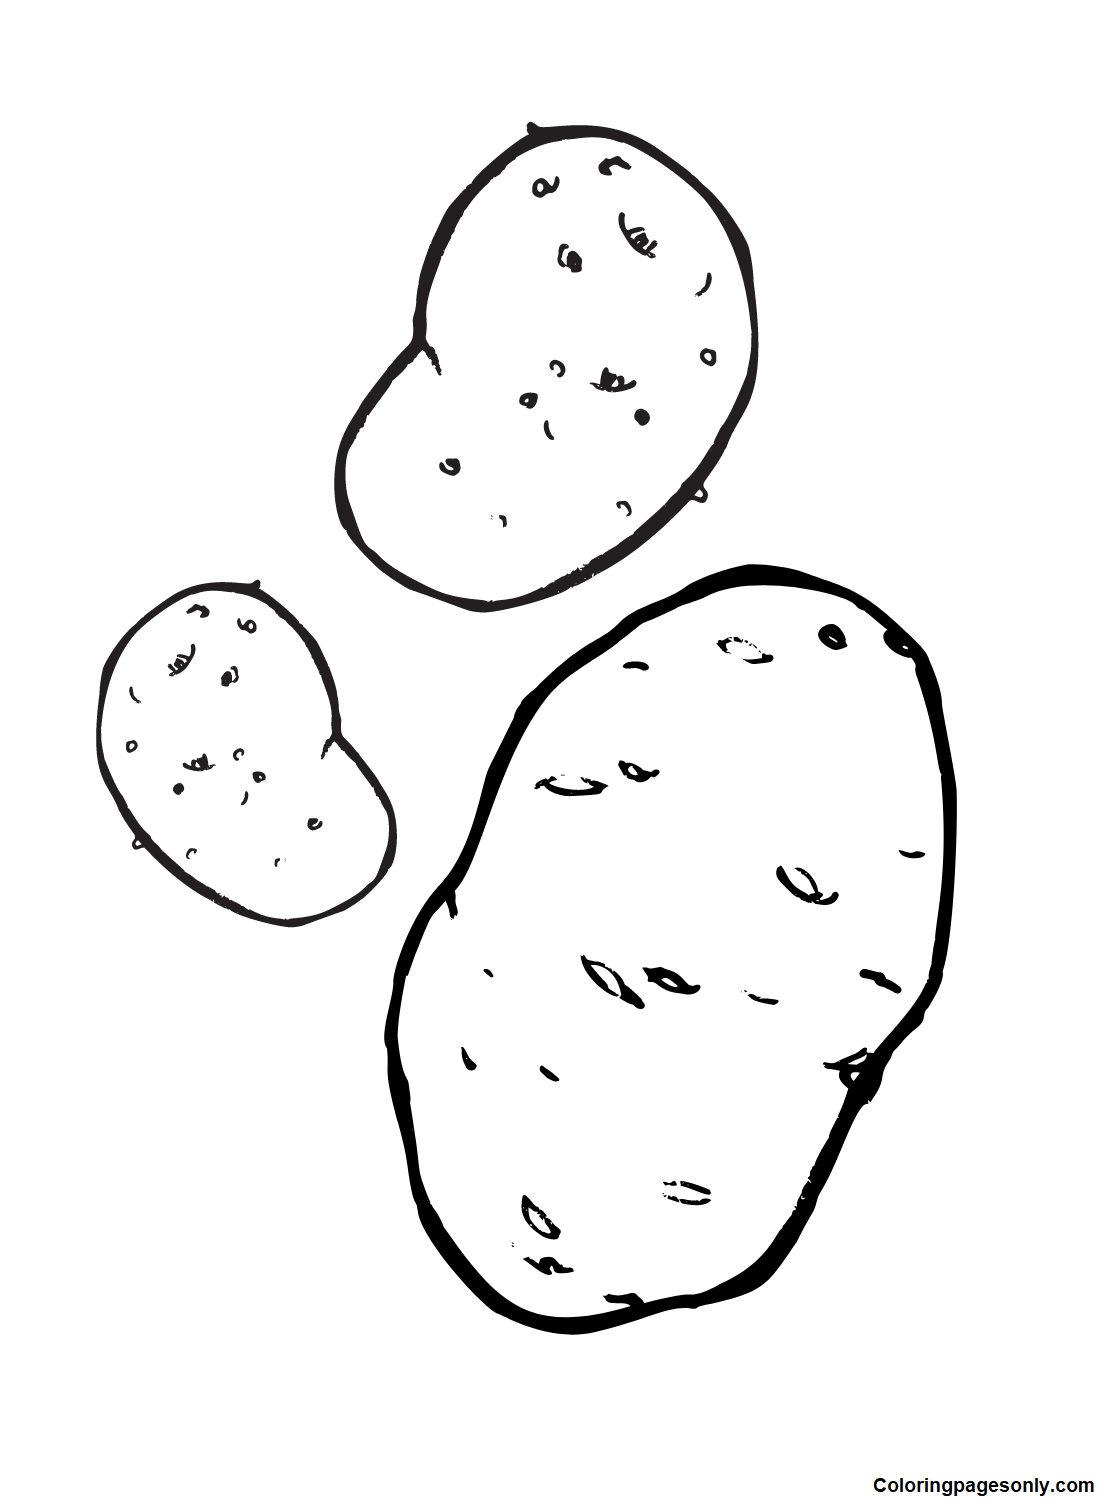 Potato coloring pages printable for free download